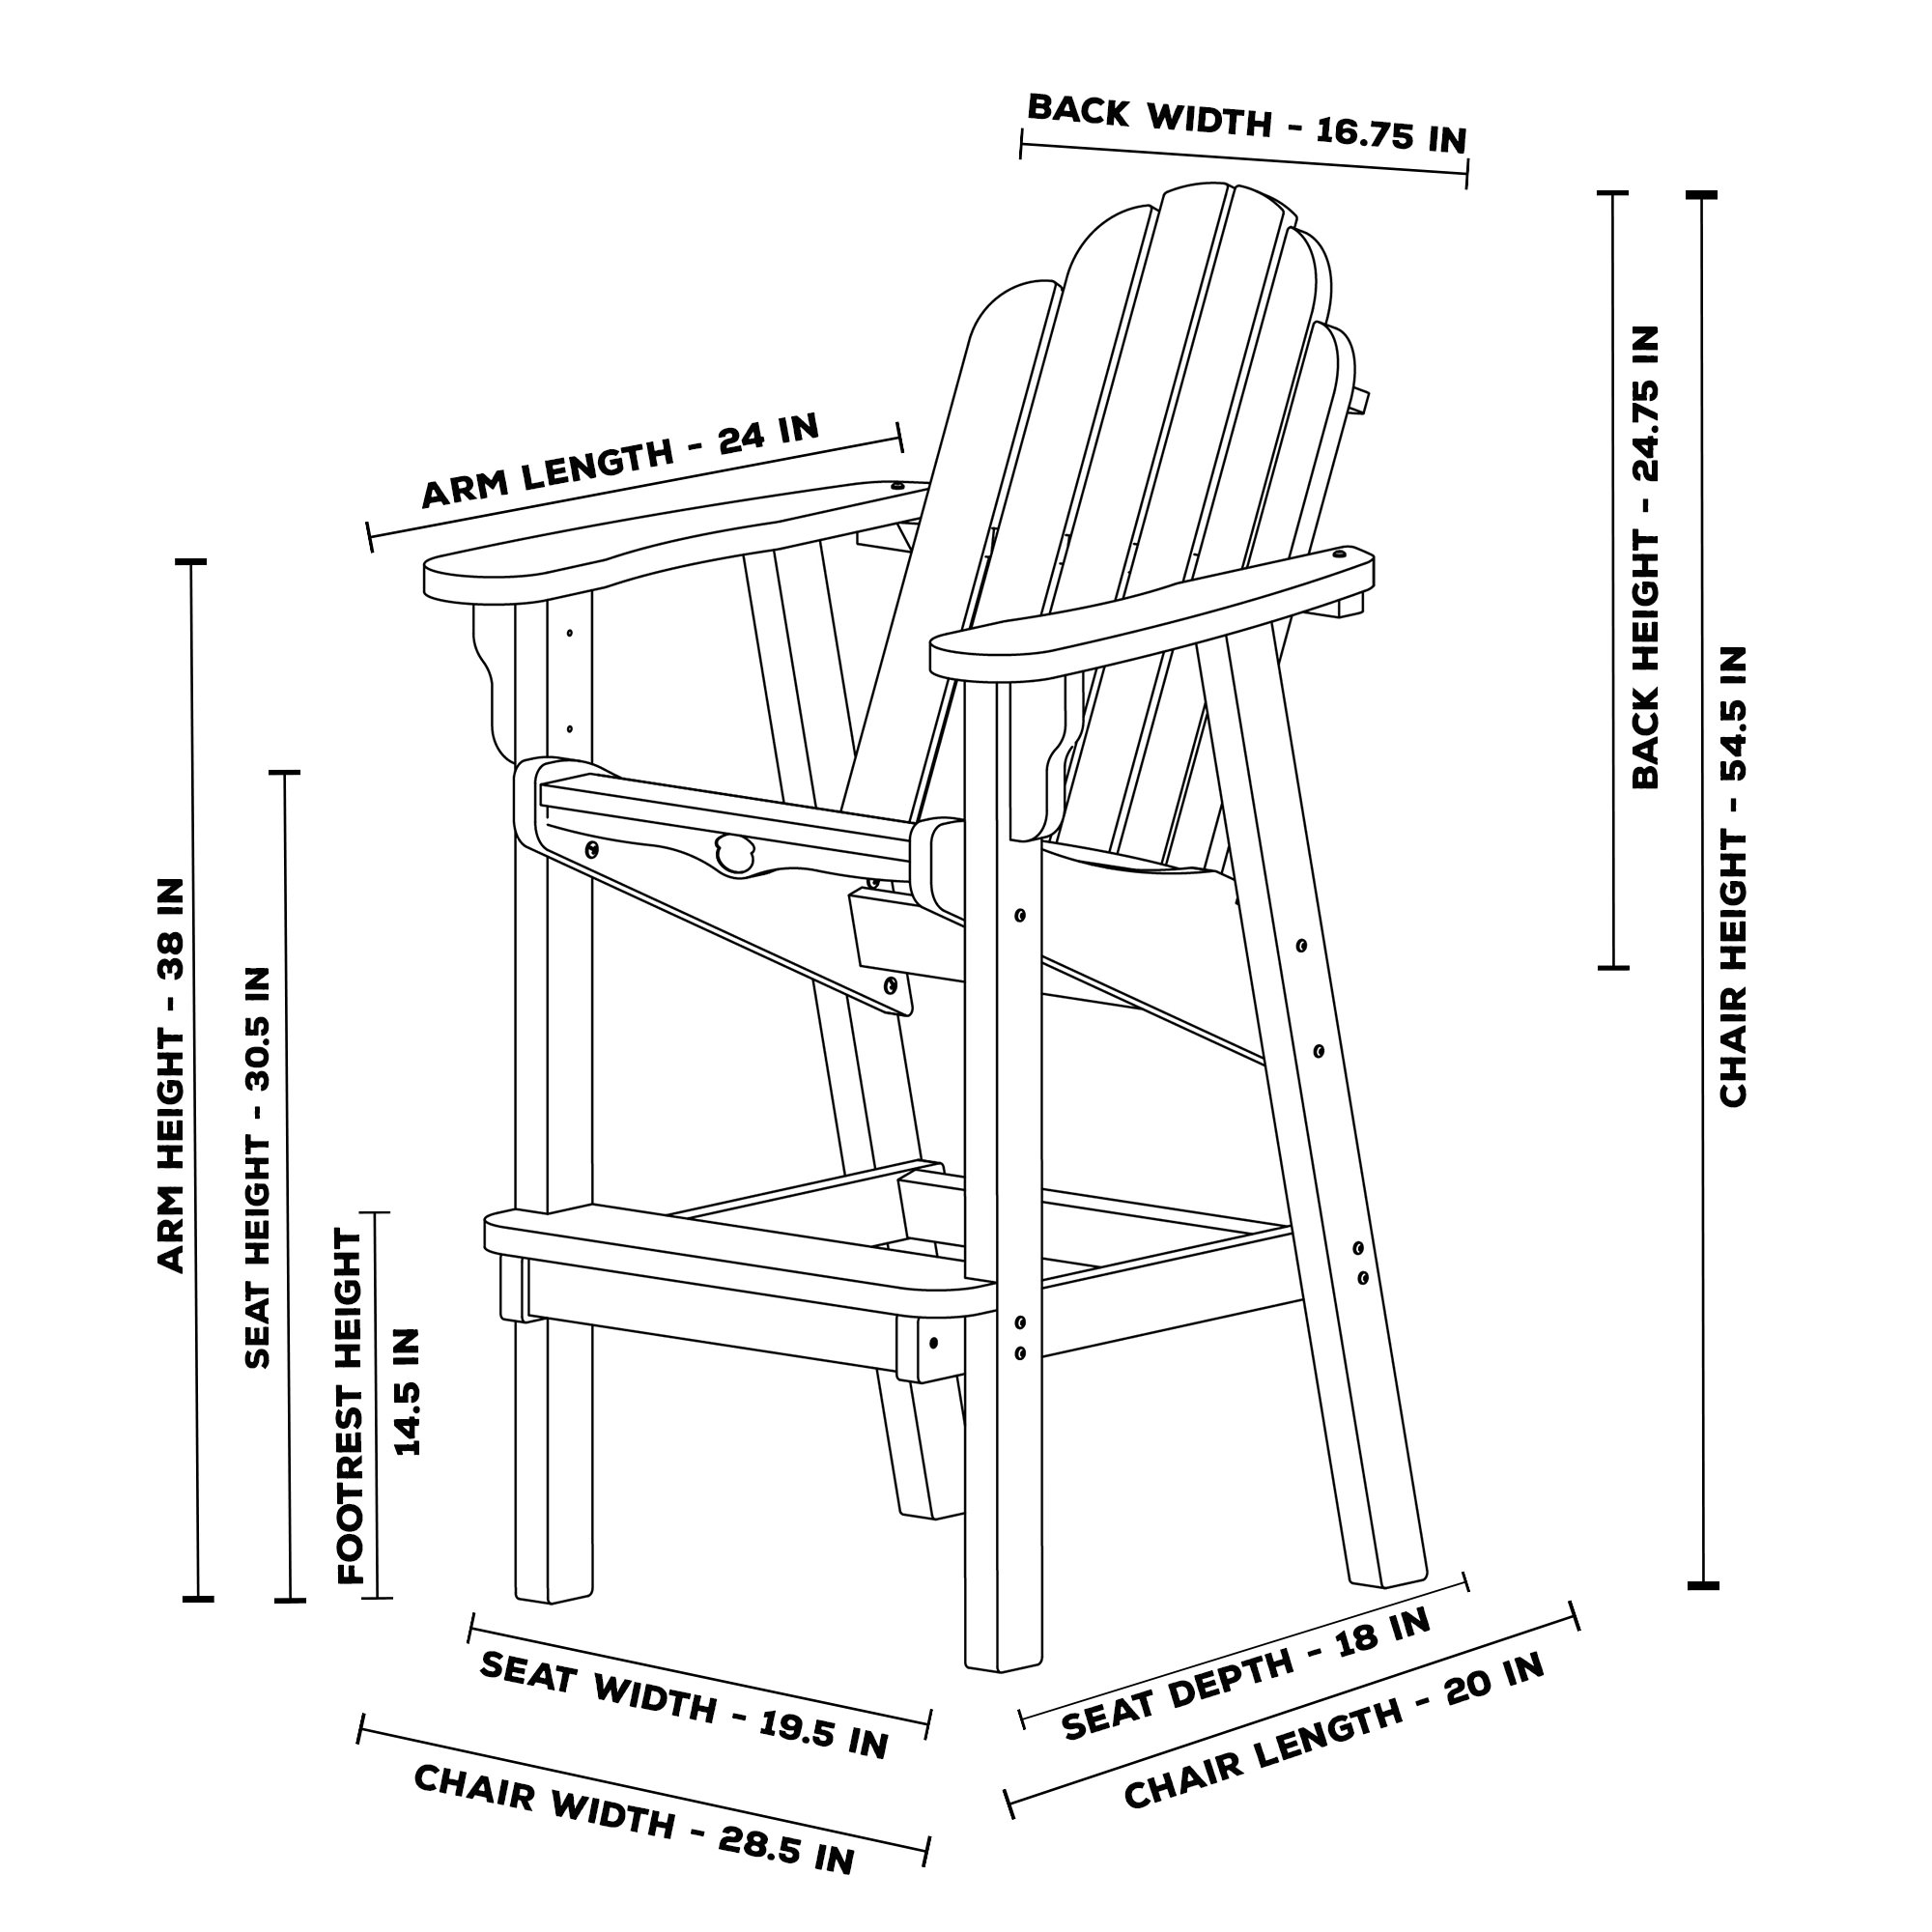 Durawood Essentials High Dining Chair, High Seat Height Dining Chairs